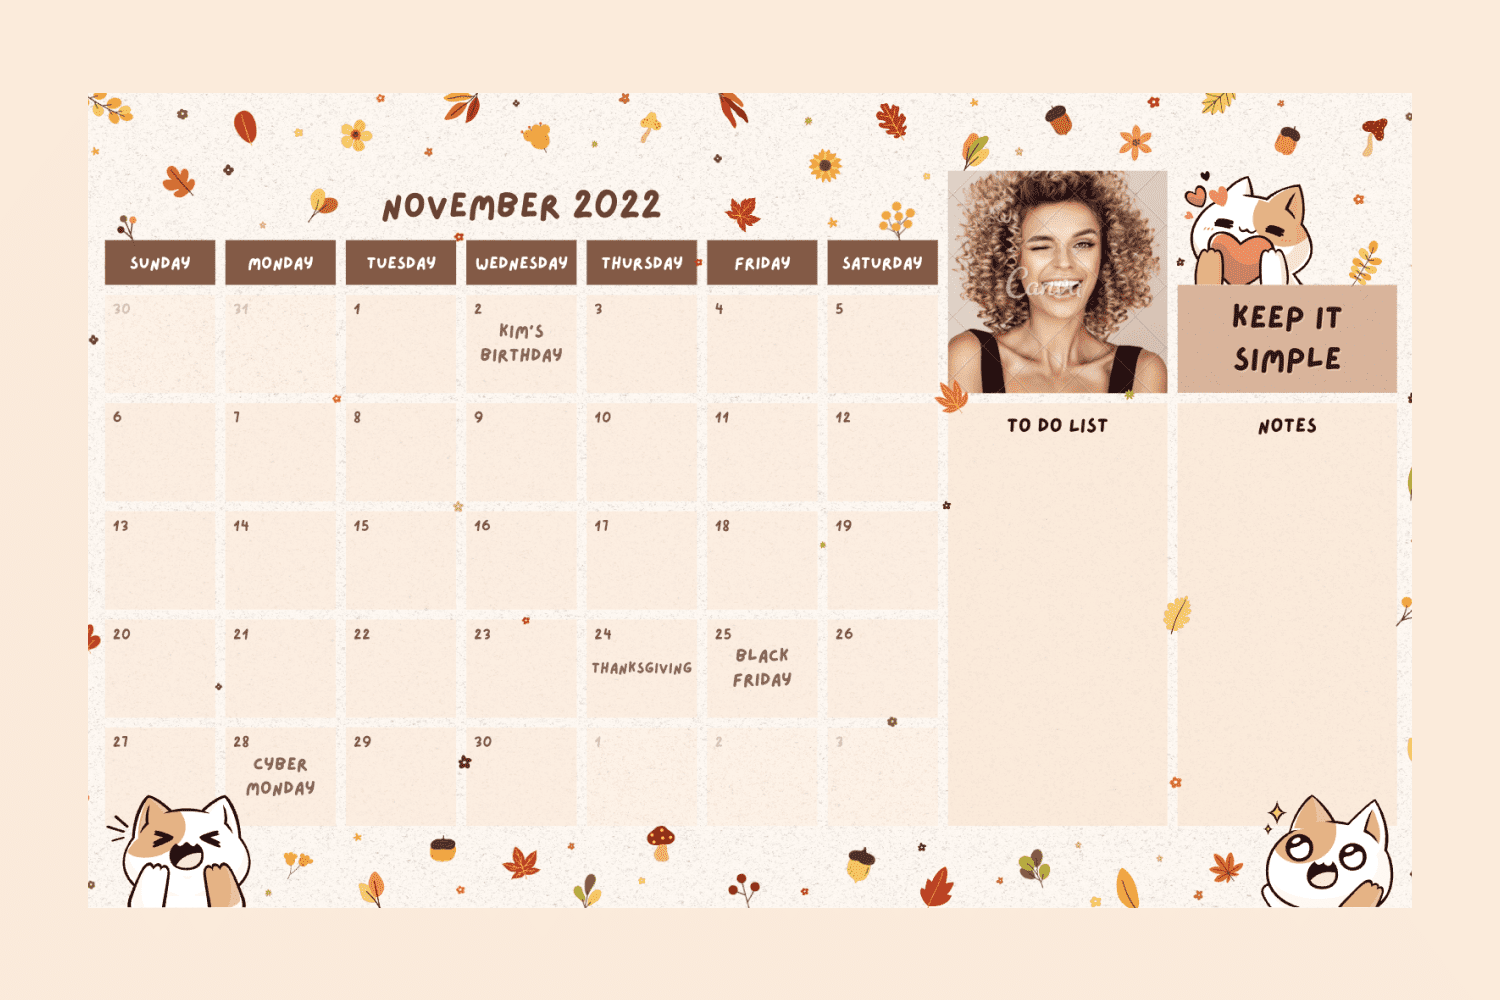 Calendar for November with drawn cats and place for assignments and notes.